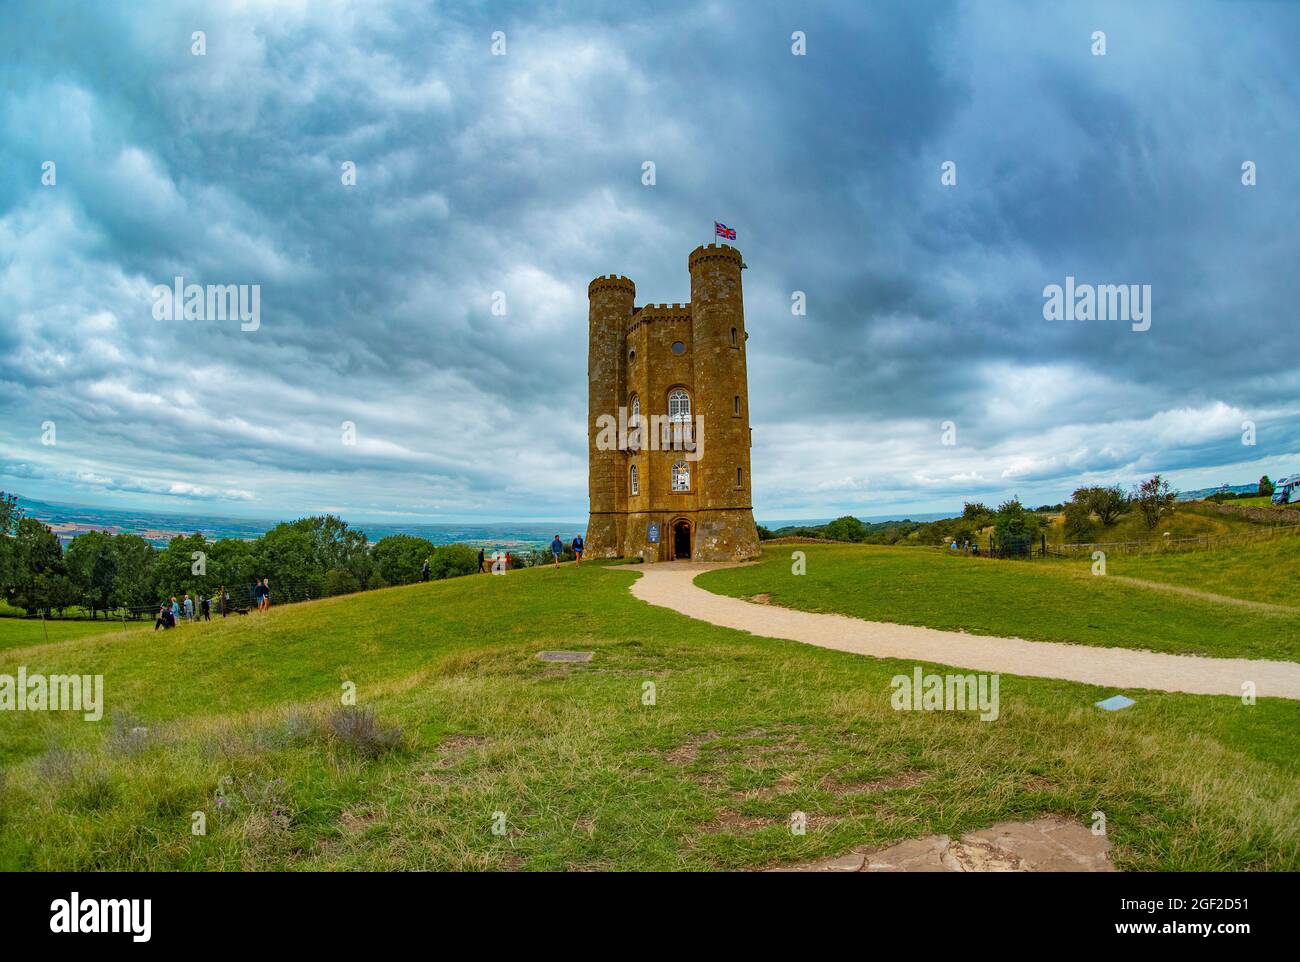 Broadway Tower, The Cotswolds, Worcestershire, UK Landscape, 2021 Stock Photo